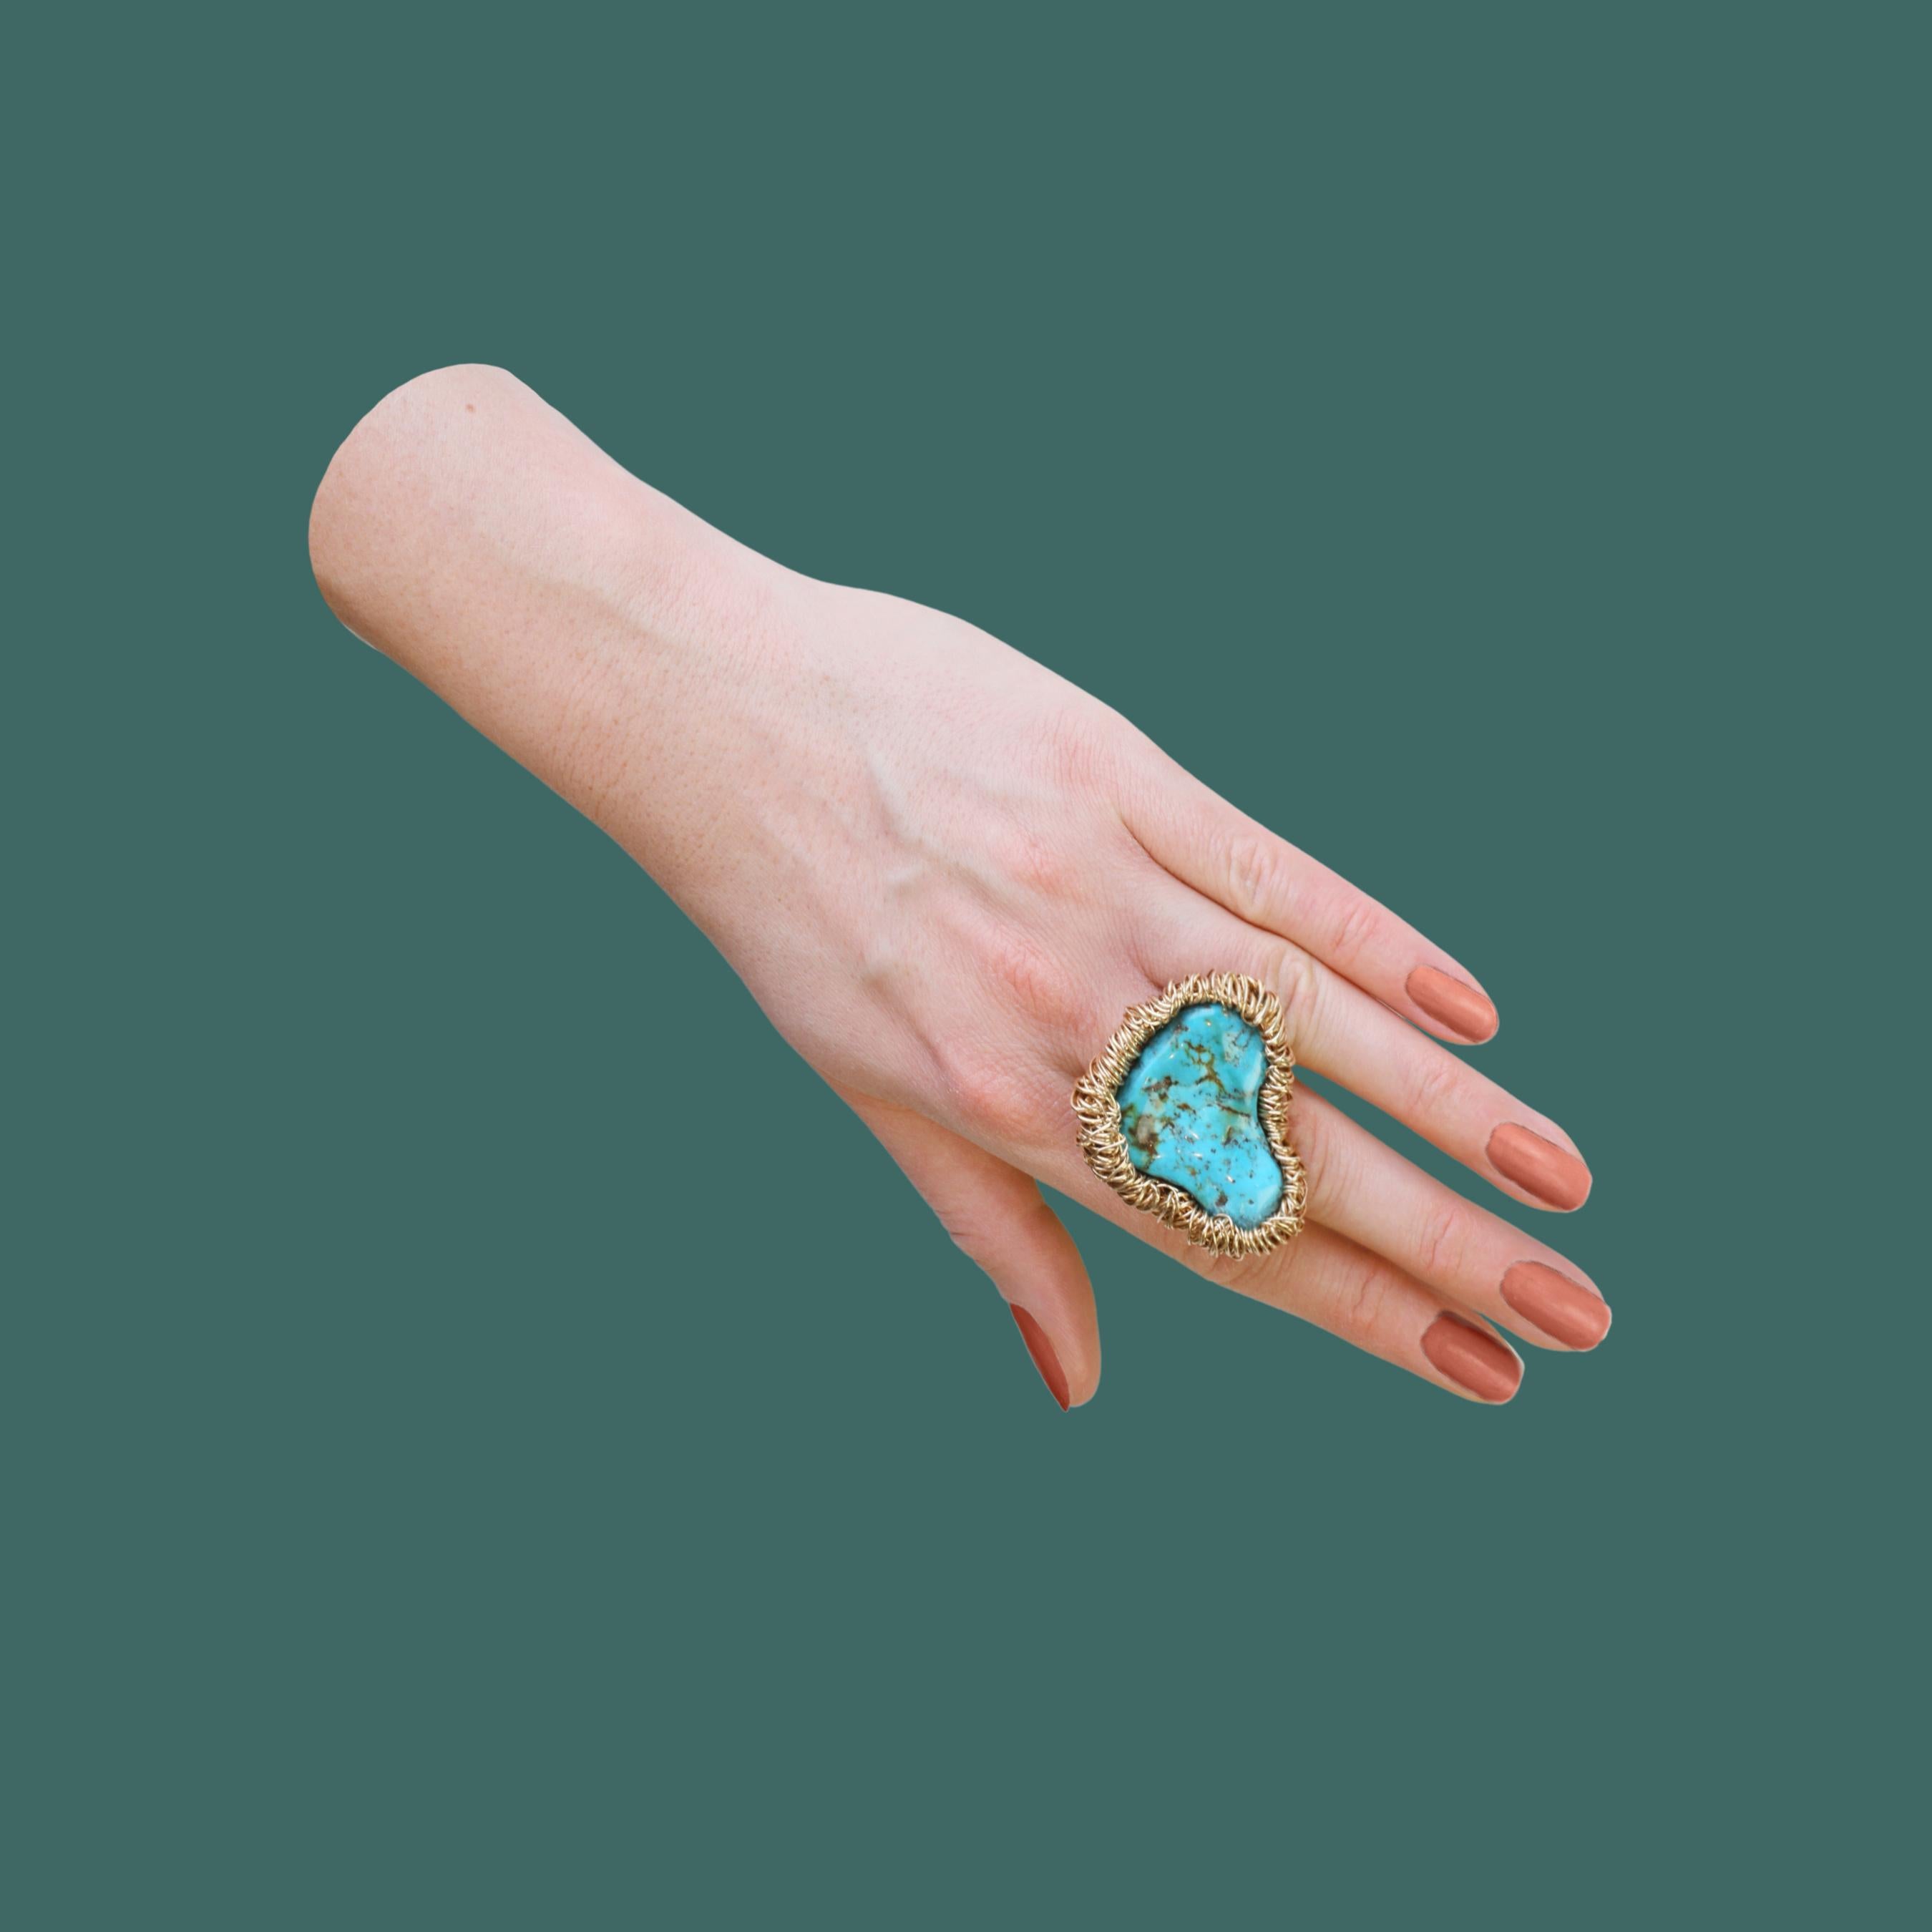 Contemporary Turquoise colourful Statement Ring in 14 Kt Gold Filled One-Off by the artist